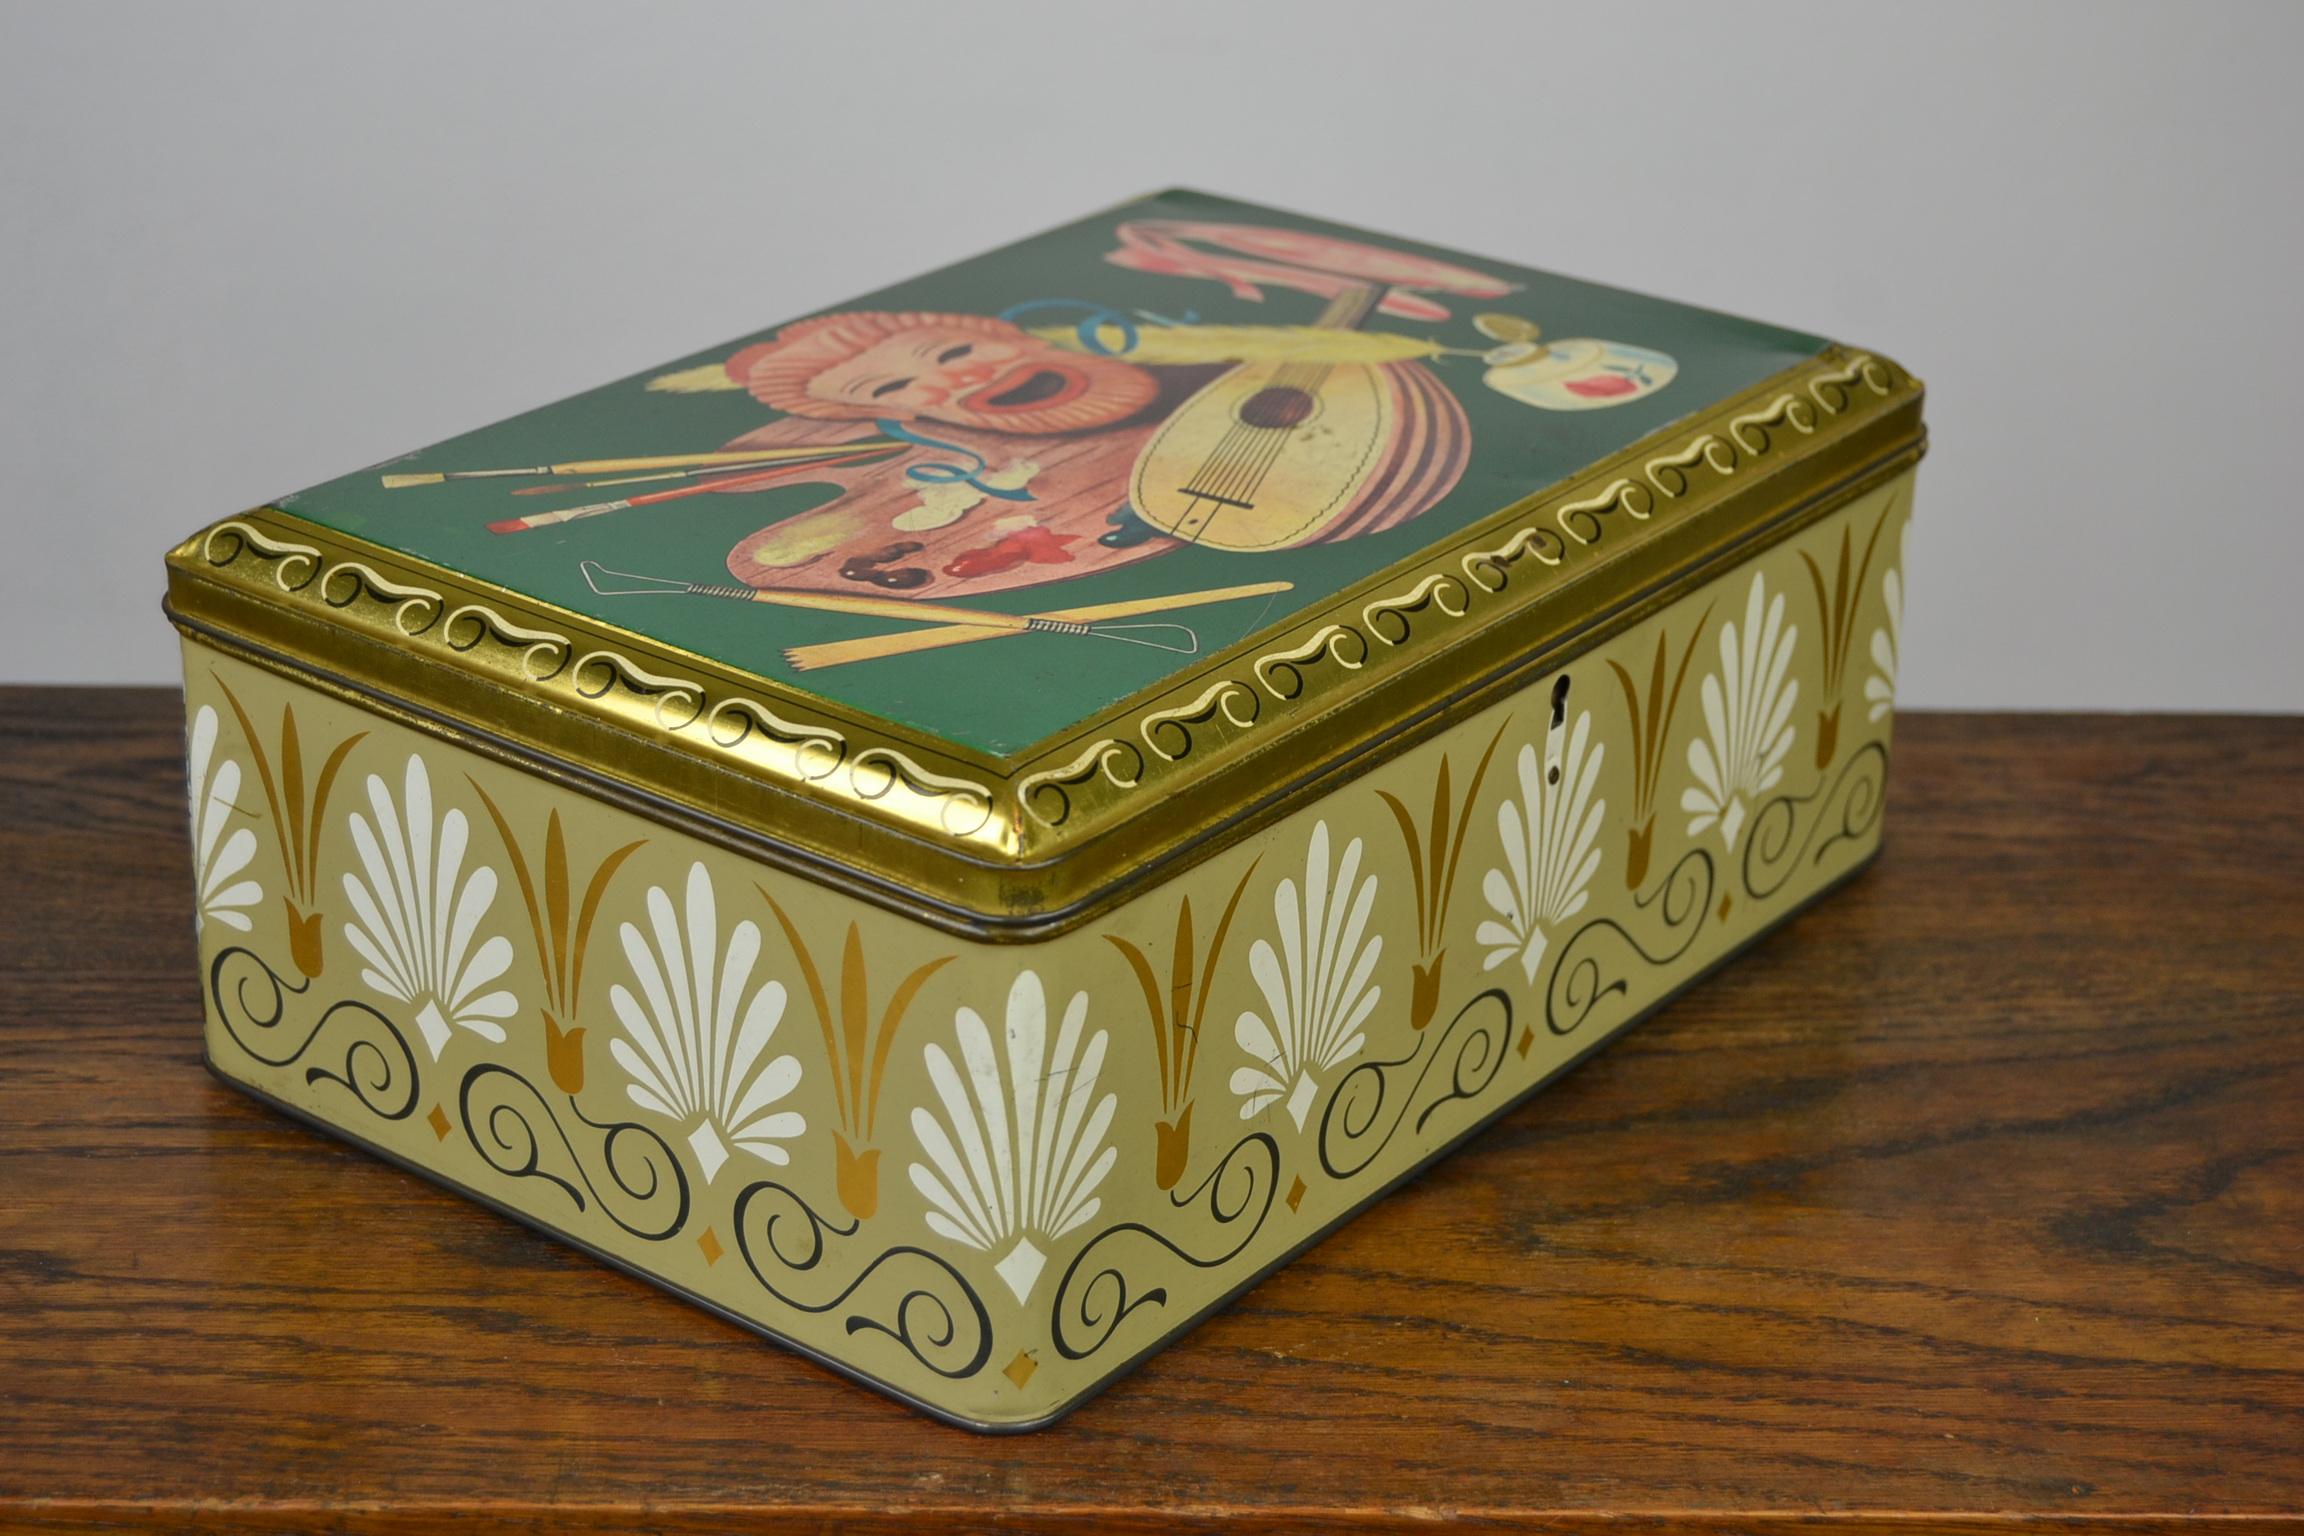 Vintage biscuit tin for Demaret Confectionary, A Belgian Candy Factory.
This vintage tin storage box has a green background with a mask, ballet shoes, inkwell with writing feather, mandoline, painting pallet with brushes and model tools and gold